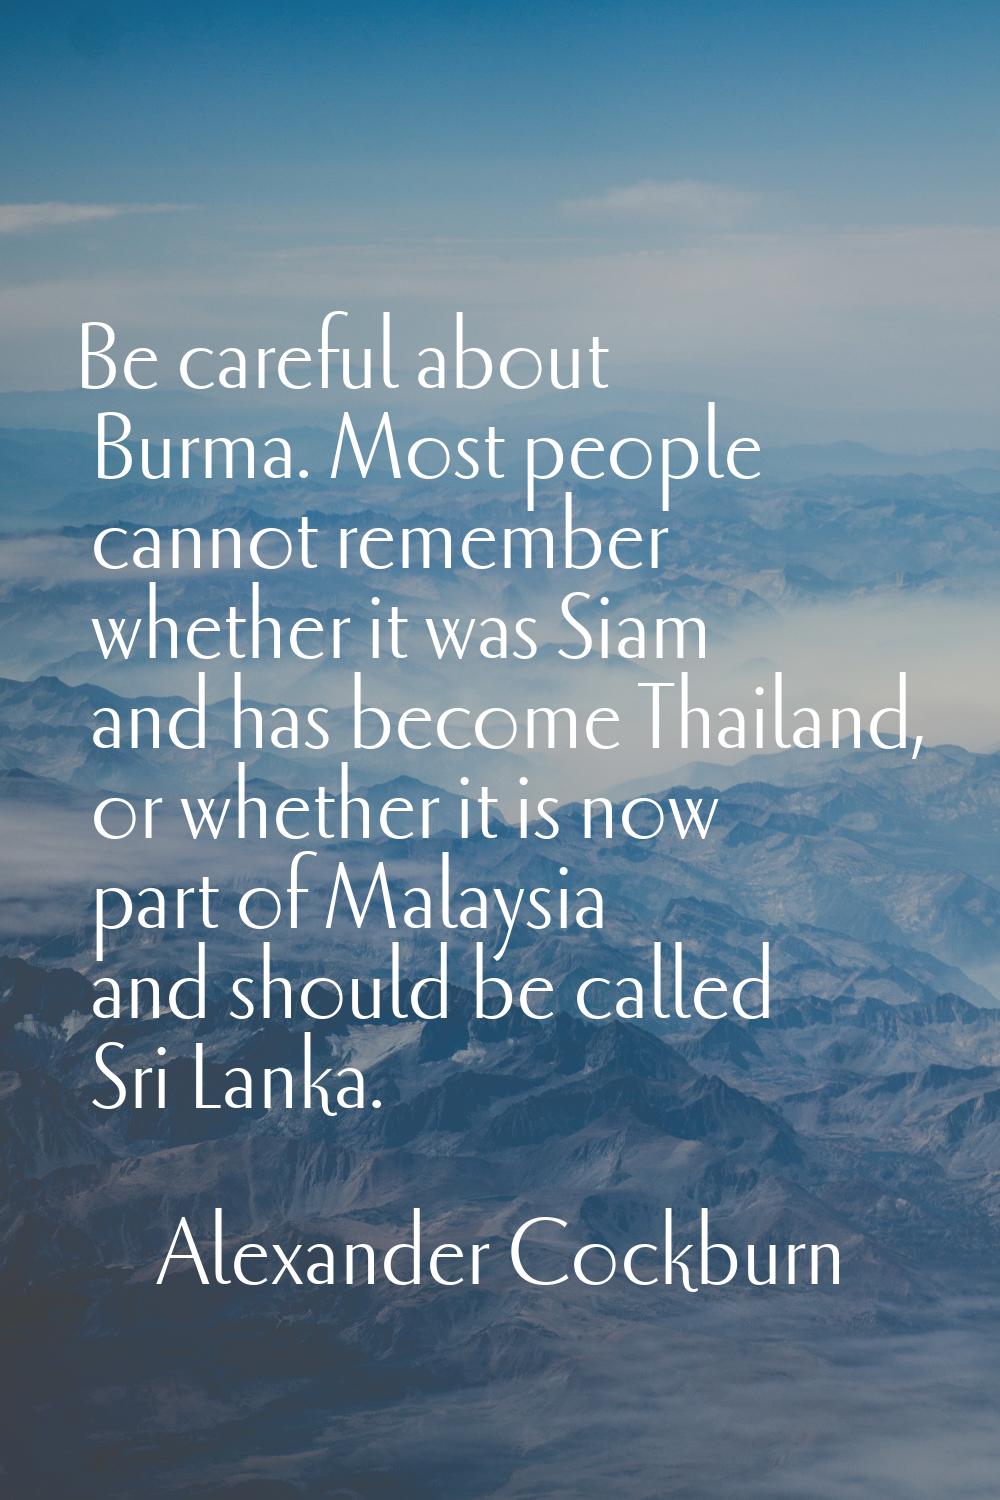 Be careful about Burma. Most people cannot remember whether it was Siam and has become Thailand, or